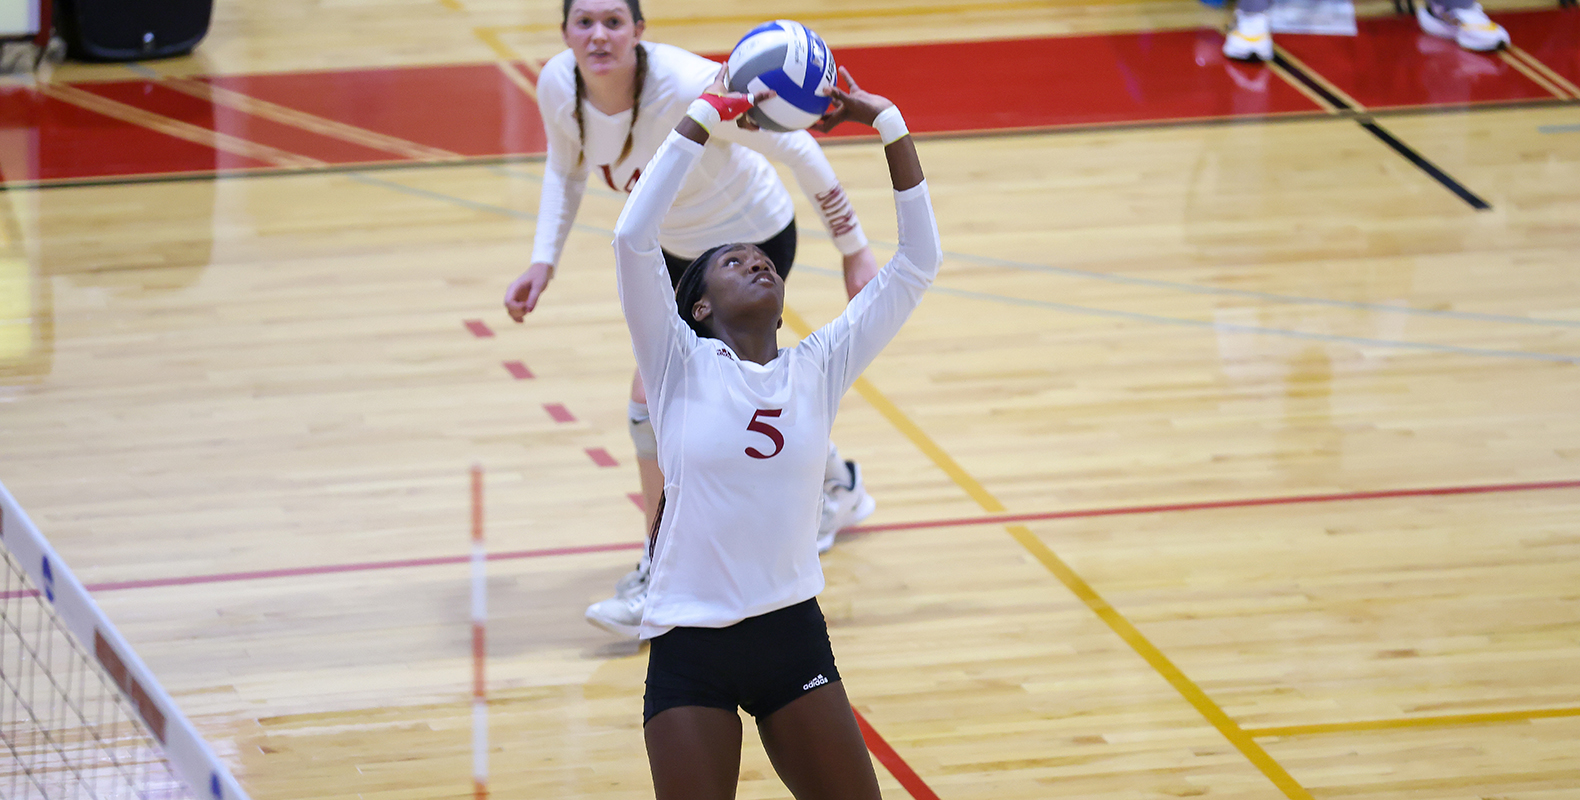 Normal Sweep, Reverse Sweep Equals Two Wins for Women’s Volleyball